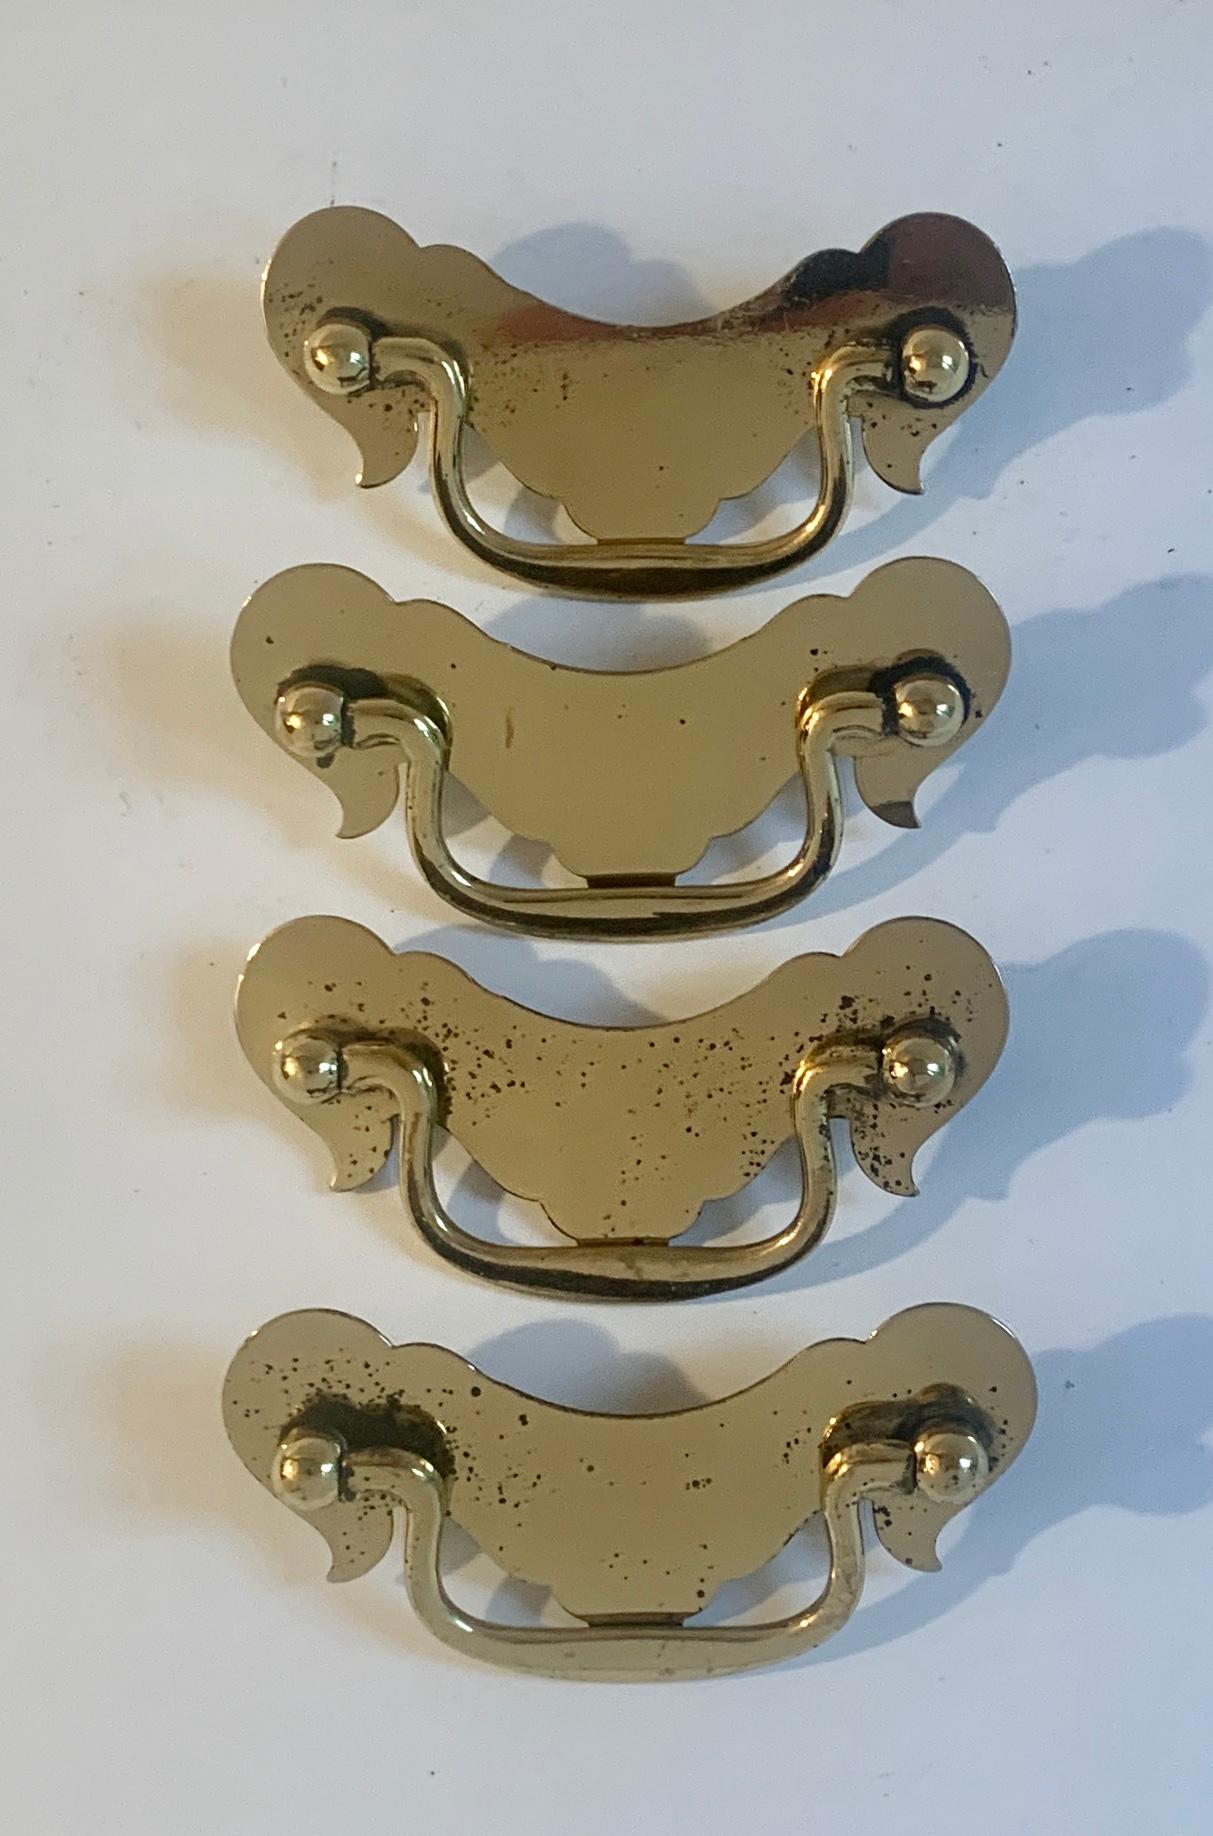 A set of four vintage brass door pulls in the style of Chippendale - the four are from an original piece of furniture we no longer could save. Wonderfully patinated and ready for installation with screws in opposing side.

Depth of material should